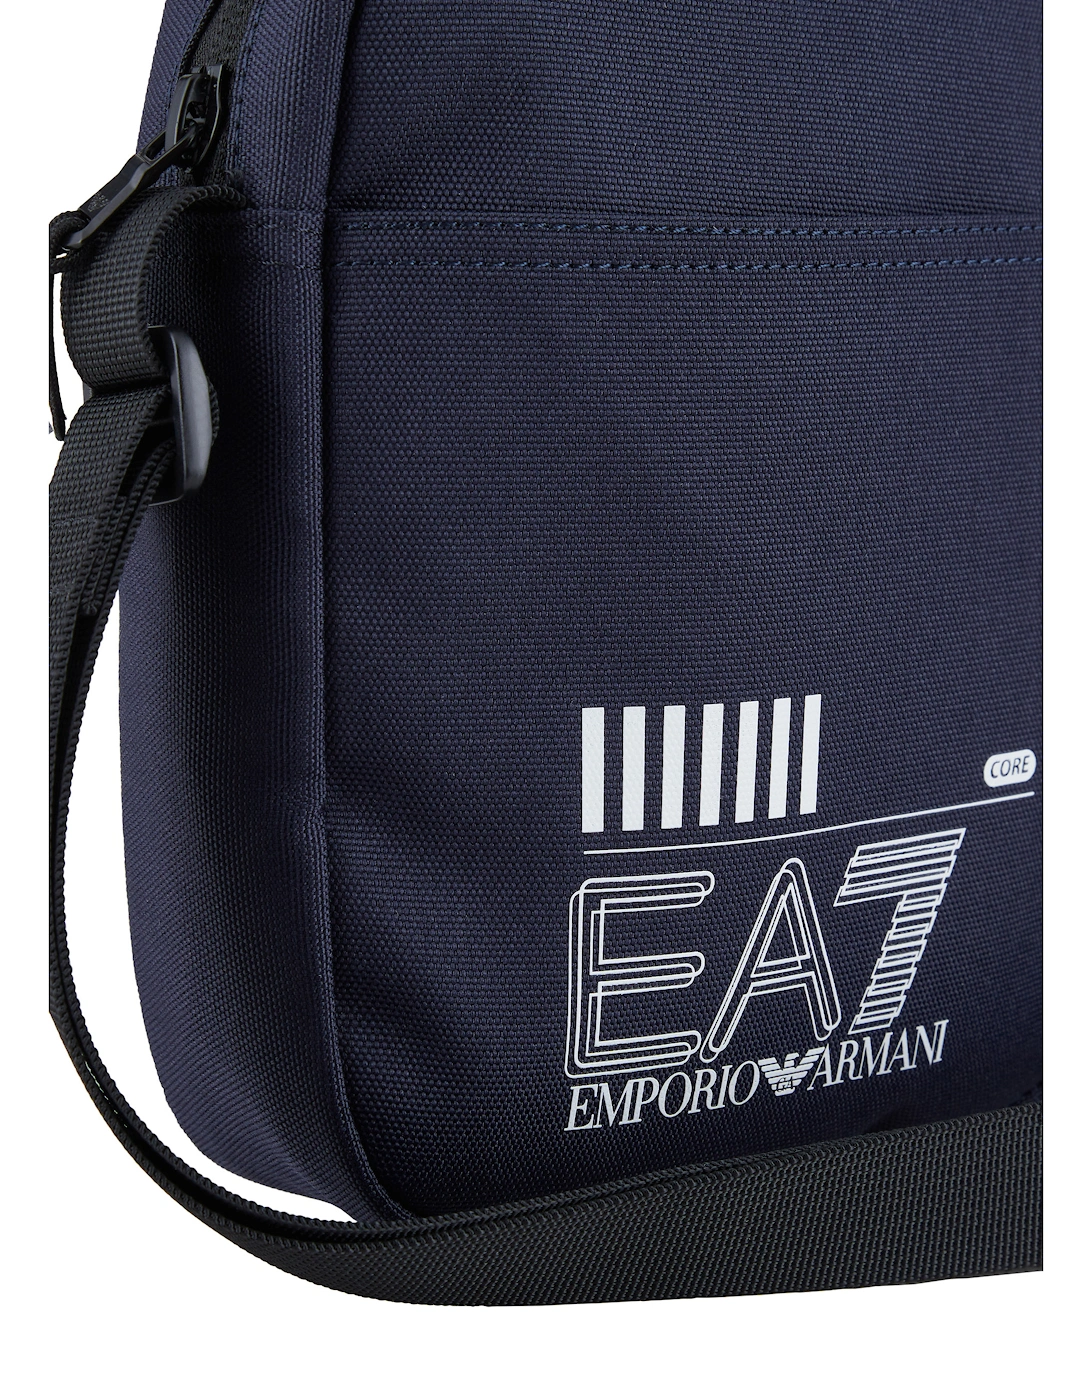 Mens Small Pouch Shoulder Bag (Navy/White)